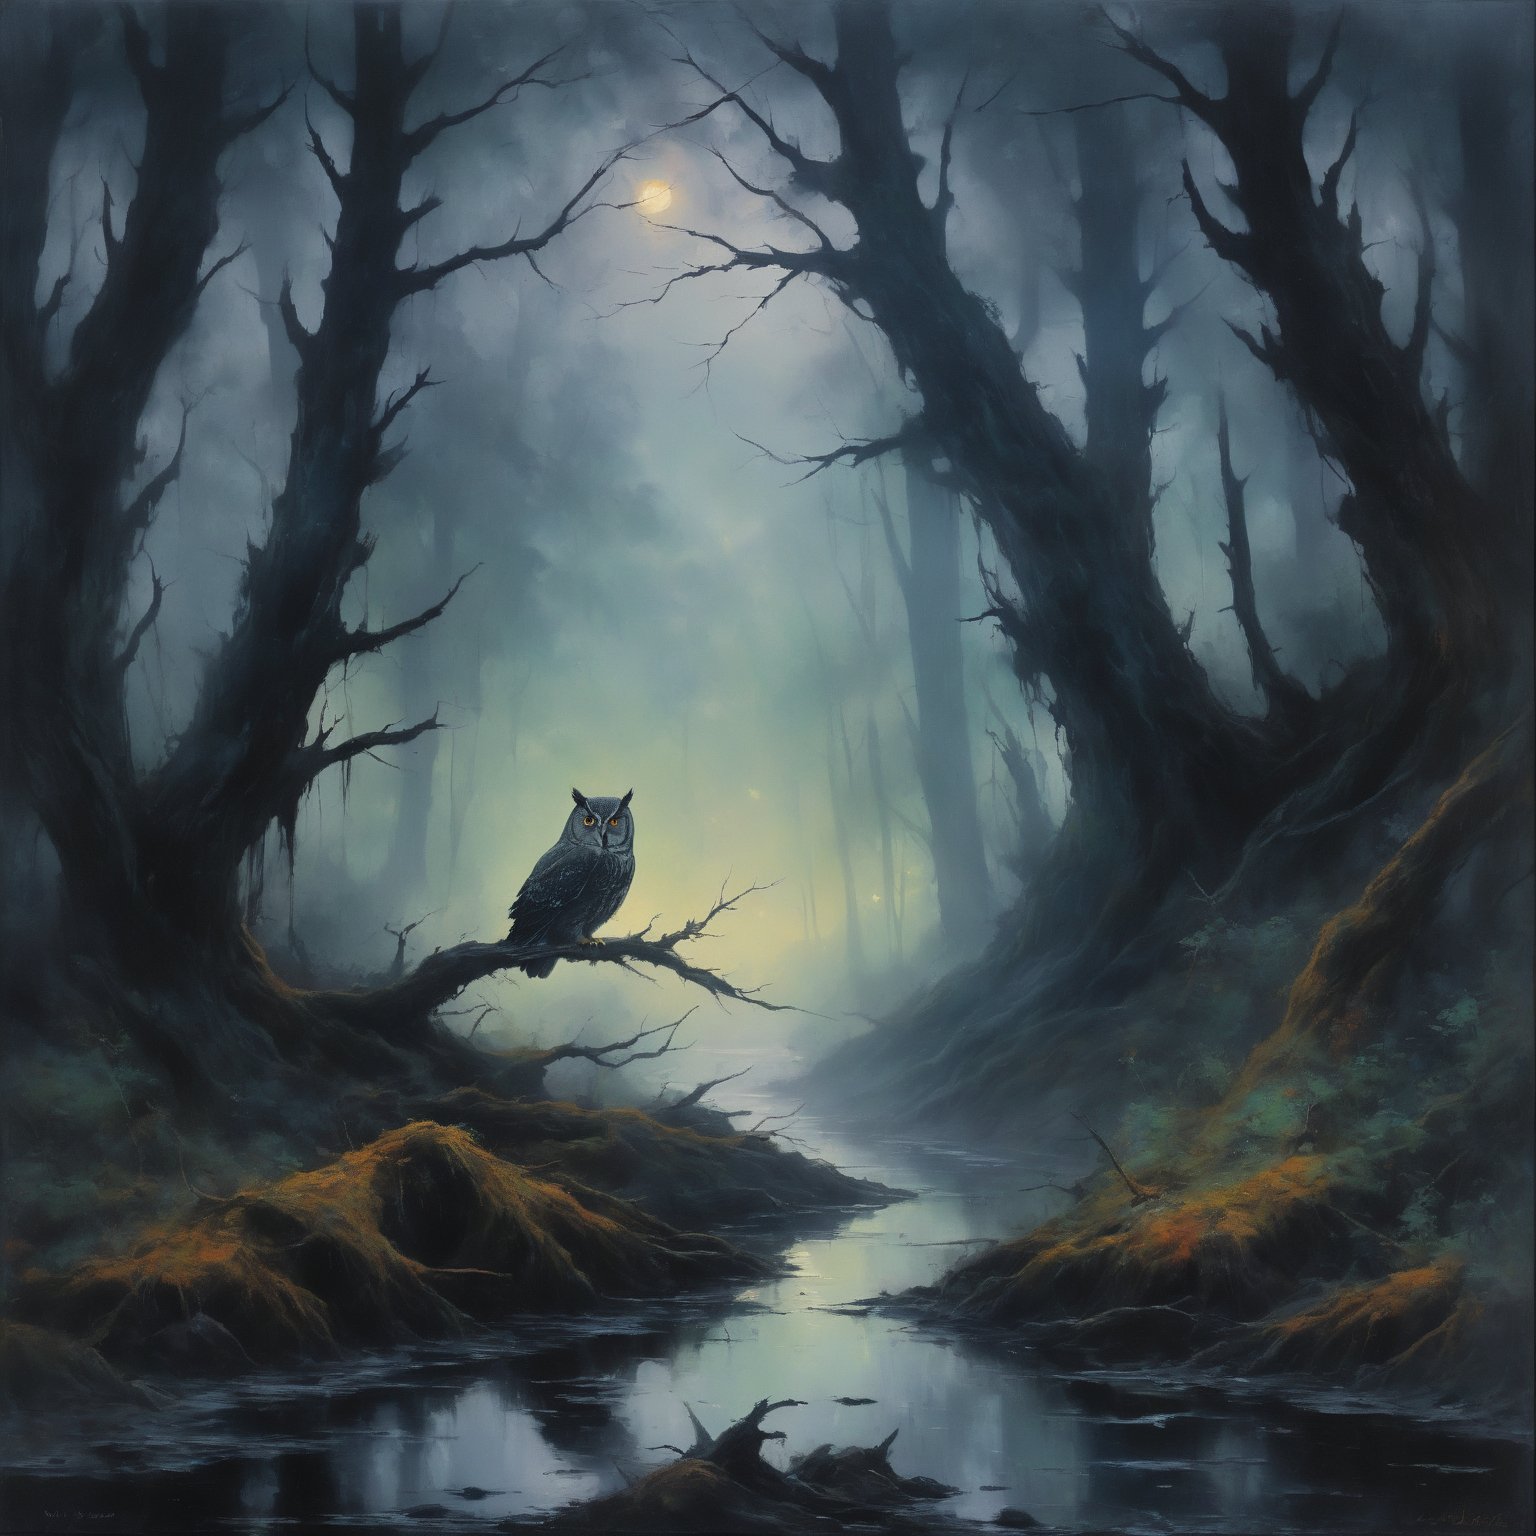 A captivating oil painting of a dark, gloomy forest shrouded in dense fog. The rain is pouring down, and the trees appear twisted and gnarled. The path is muddy, with puddles reflecting the somber, overcast sky. In the distance, a mysterious silhouette of an owl perches on a branch, watching over the scene. The colors used in the painting are mostly dark blues, grays, and deep greens, with hints of gold and orange in the sky to create a sense of depth and atmosphere., painting